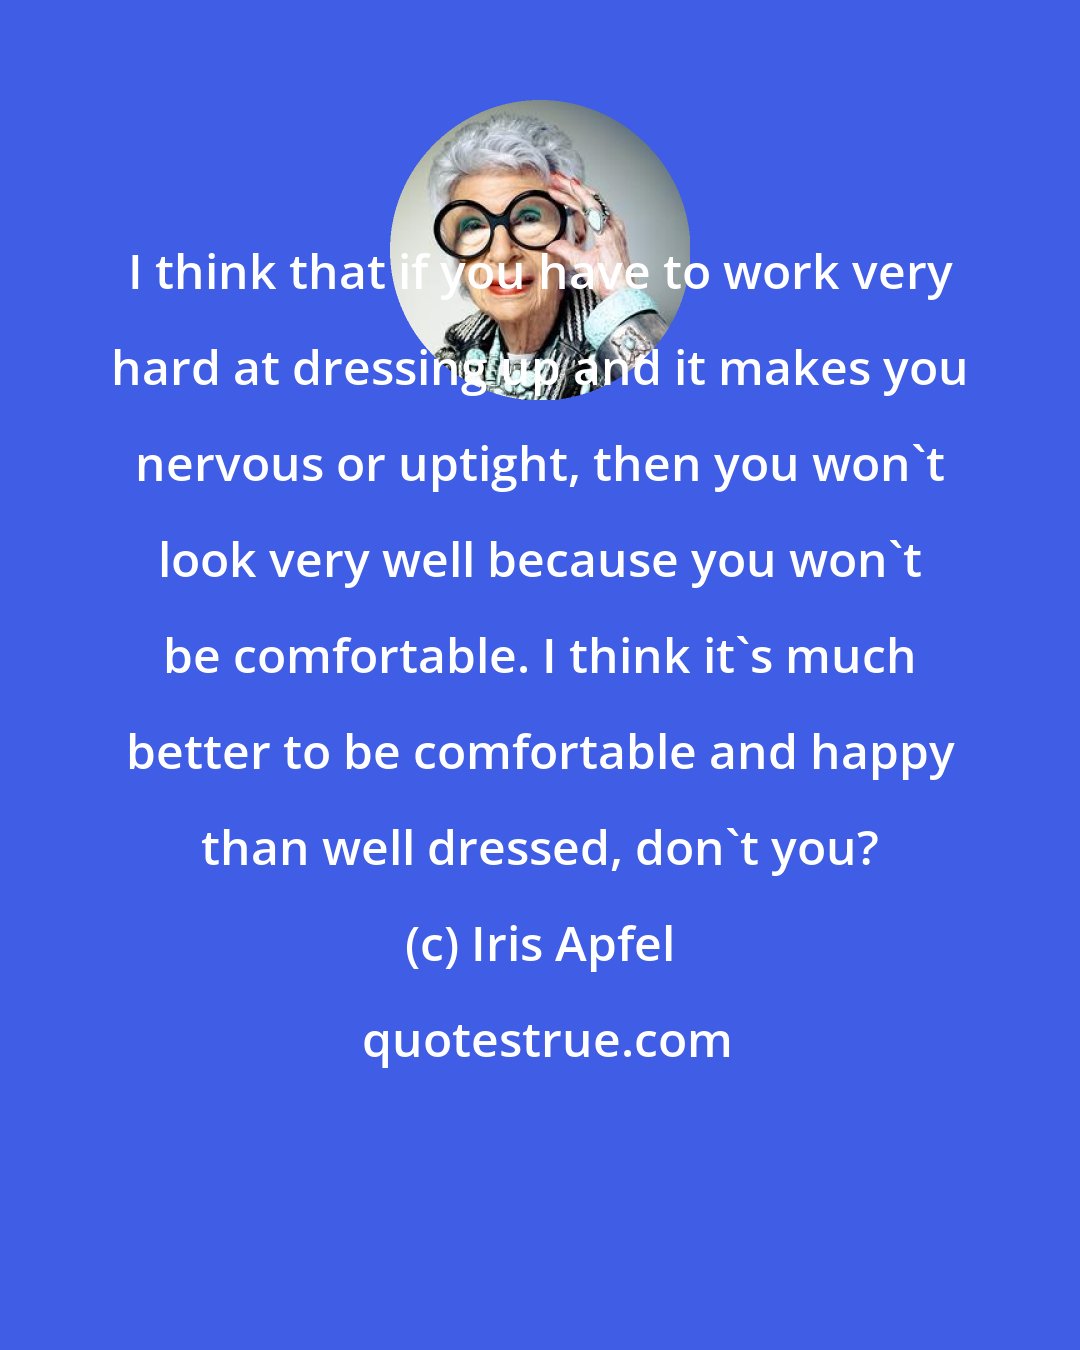 Iris Apfel: I think that if you have to work very hard at dressing up and it makes you nervous or uptight, then you won't look very well because you won't be comfortable. I think it's much better to be comfortable and happy than well dressed, don't you?